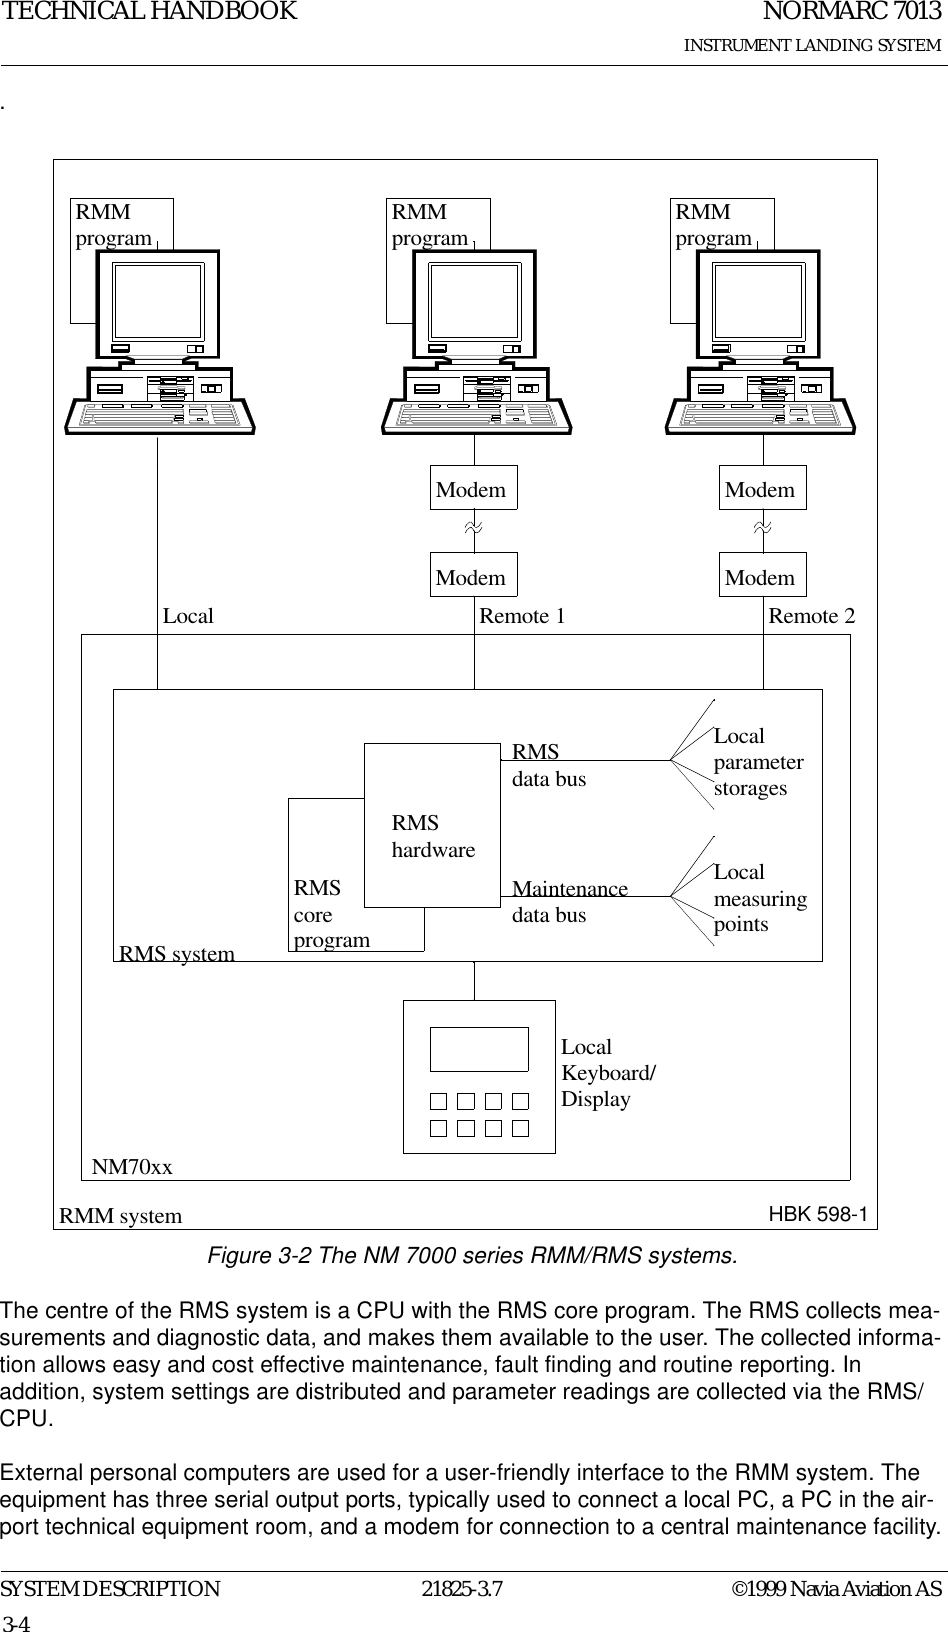 NORMARC 7013INSTRUMENT LANDING SYSTEMTECHNICAL HANDBOOKSYSTEM DESCRIPTION 21825-3.7 ©1999 Navia Aviation AS3-4.Figure 3-2 The NM 7000 series RMM/RMS systems.The centre of the RMS system is a CPU with the RMS core program. The RMS collects mea-surements and diagnostic data, and makes them available to the user. The collected informa-tion allows easy and cost effective maintenance, fault finding and routine reporting. In addition, system settings are distributed and parameter readings are collected via the RMS/CPU.External personal computers are used for a user-friendly interface to the RMM system. The equipment has three serial output ports, typically used to connect a local PC, a PC in the air-port technical equipment room, and a modem for connection to a central maintenance facility.RMShardwareRMScoreprogramLocalmeasuringpointsMaintenancedata busRMS data busLocalparameterstoragesLocalKeyboard/DisplayModemNM70xxRMS systemRMM systemLocal Remote 1 Remote 2RMM program RMM program RMMprogramModem ModemModemHBK 598-1